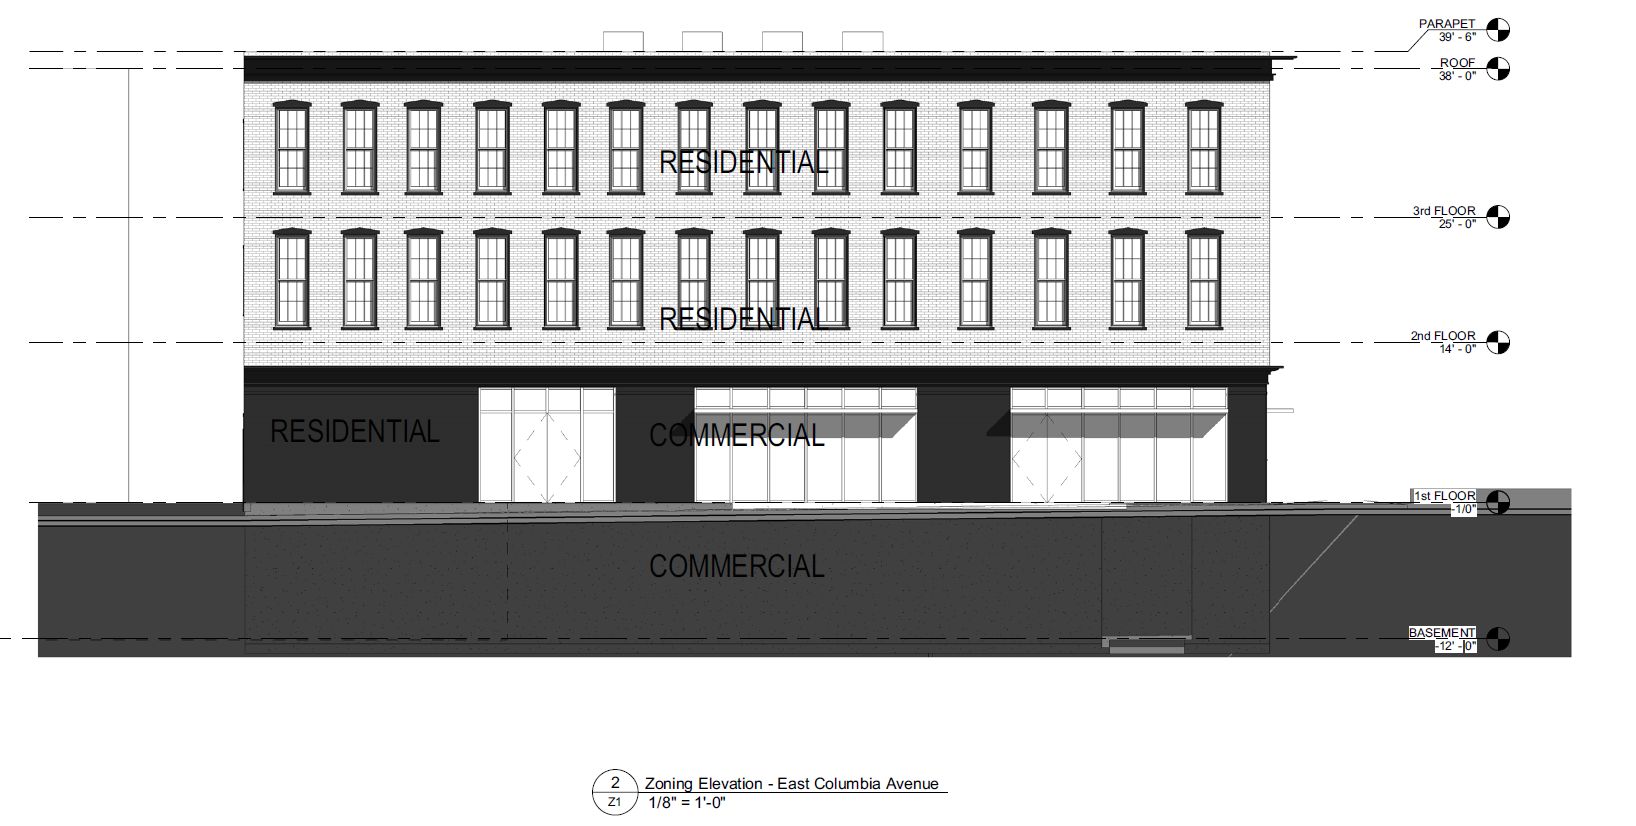 1700 Frankford Avenue. Front elevation. Credit: Ambit Architecture via the City of Philadelphia